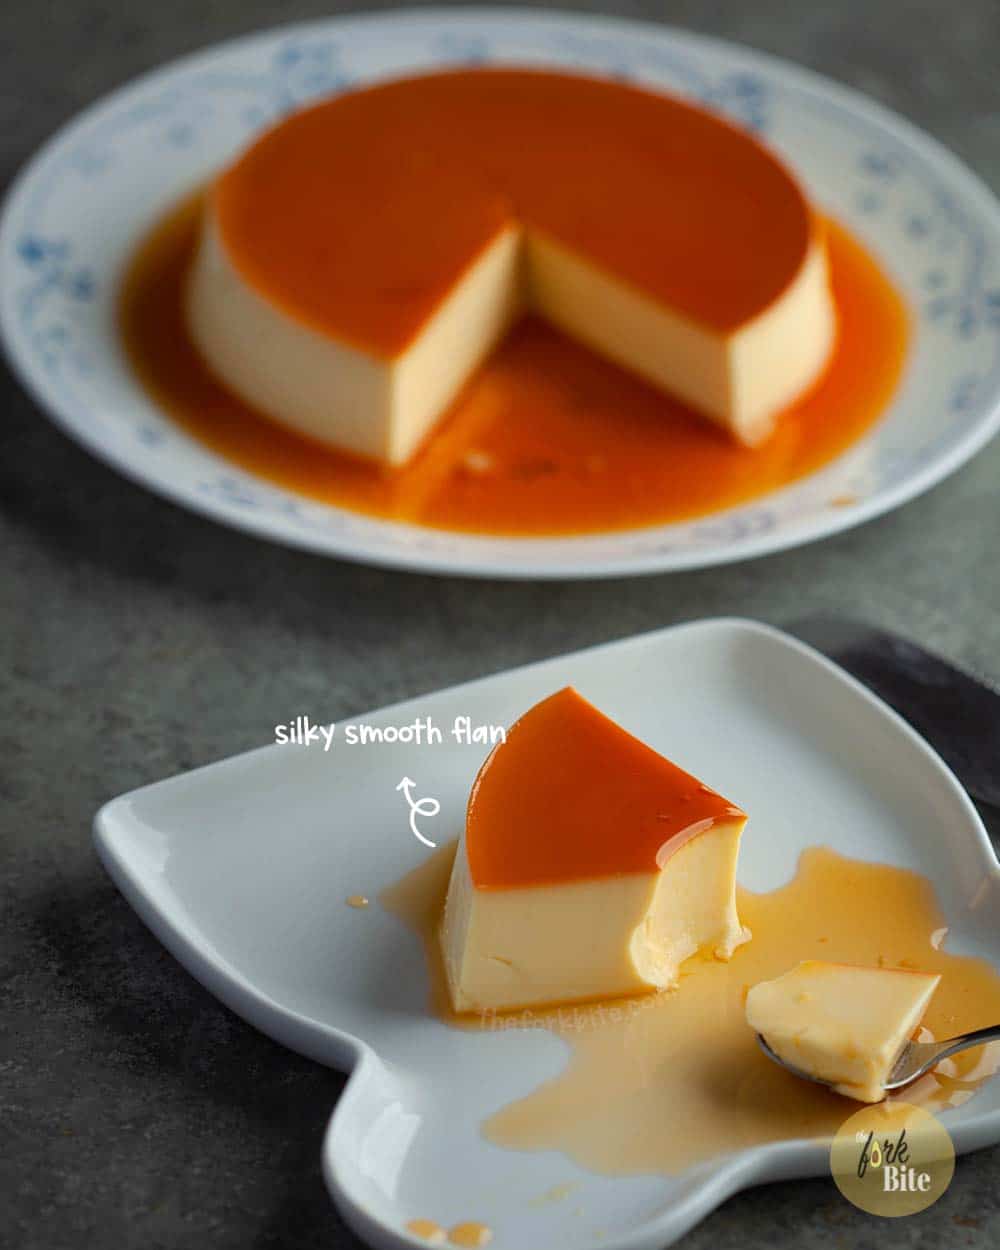 this instant pot flan includes the right amount of eggs to bind the ingredients together, but not so much as to give it an eggy flavor.